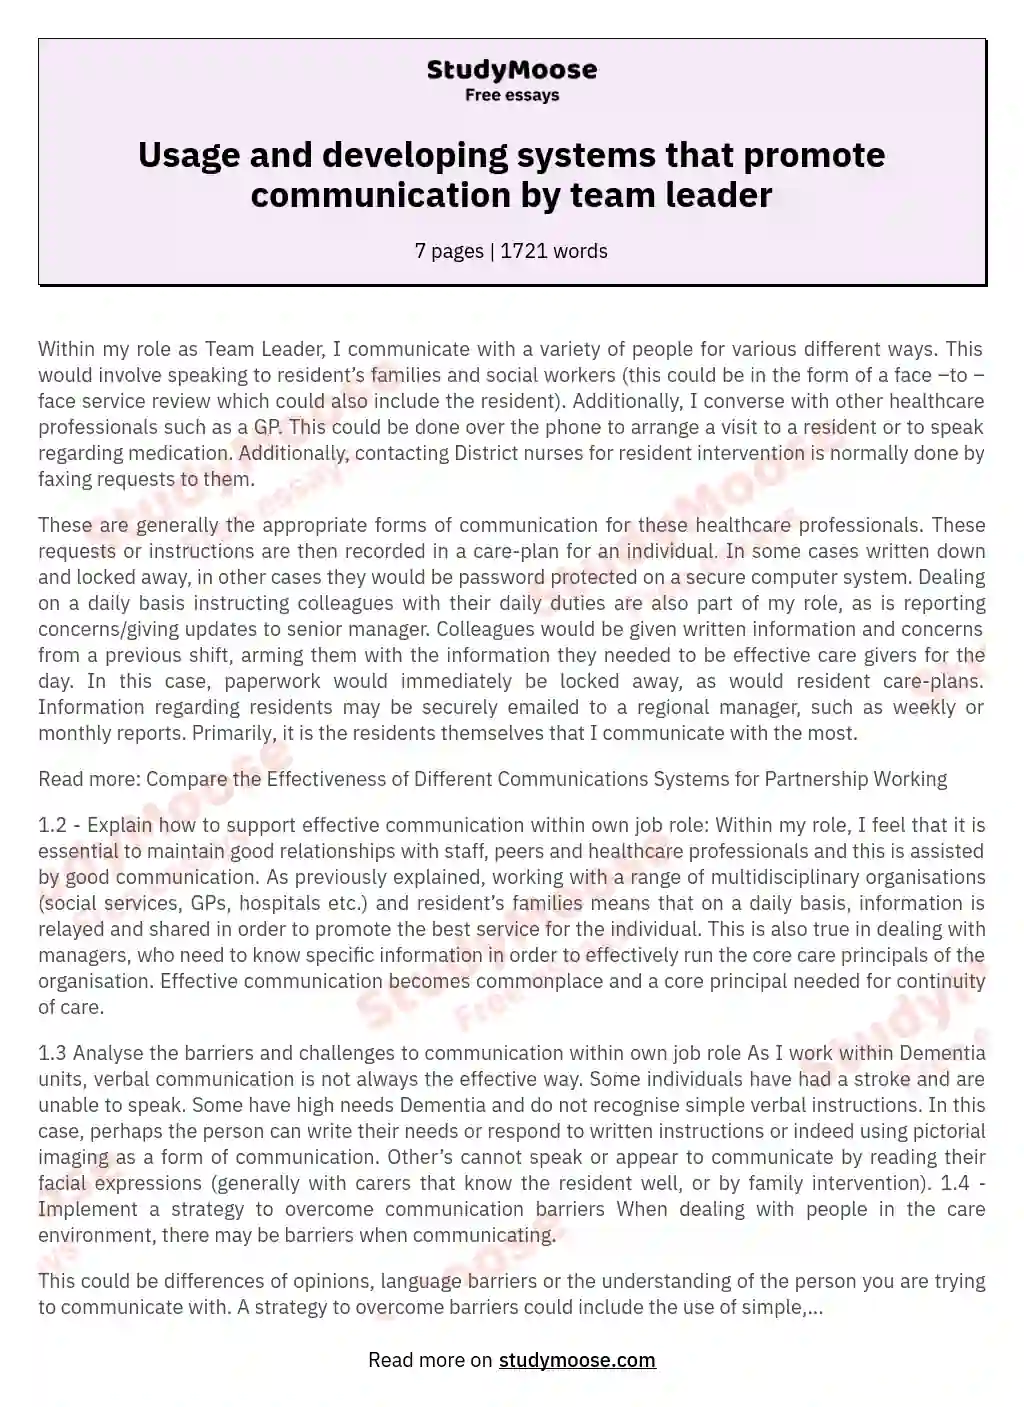 Usage and developing systems that promote communication by team leader essay